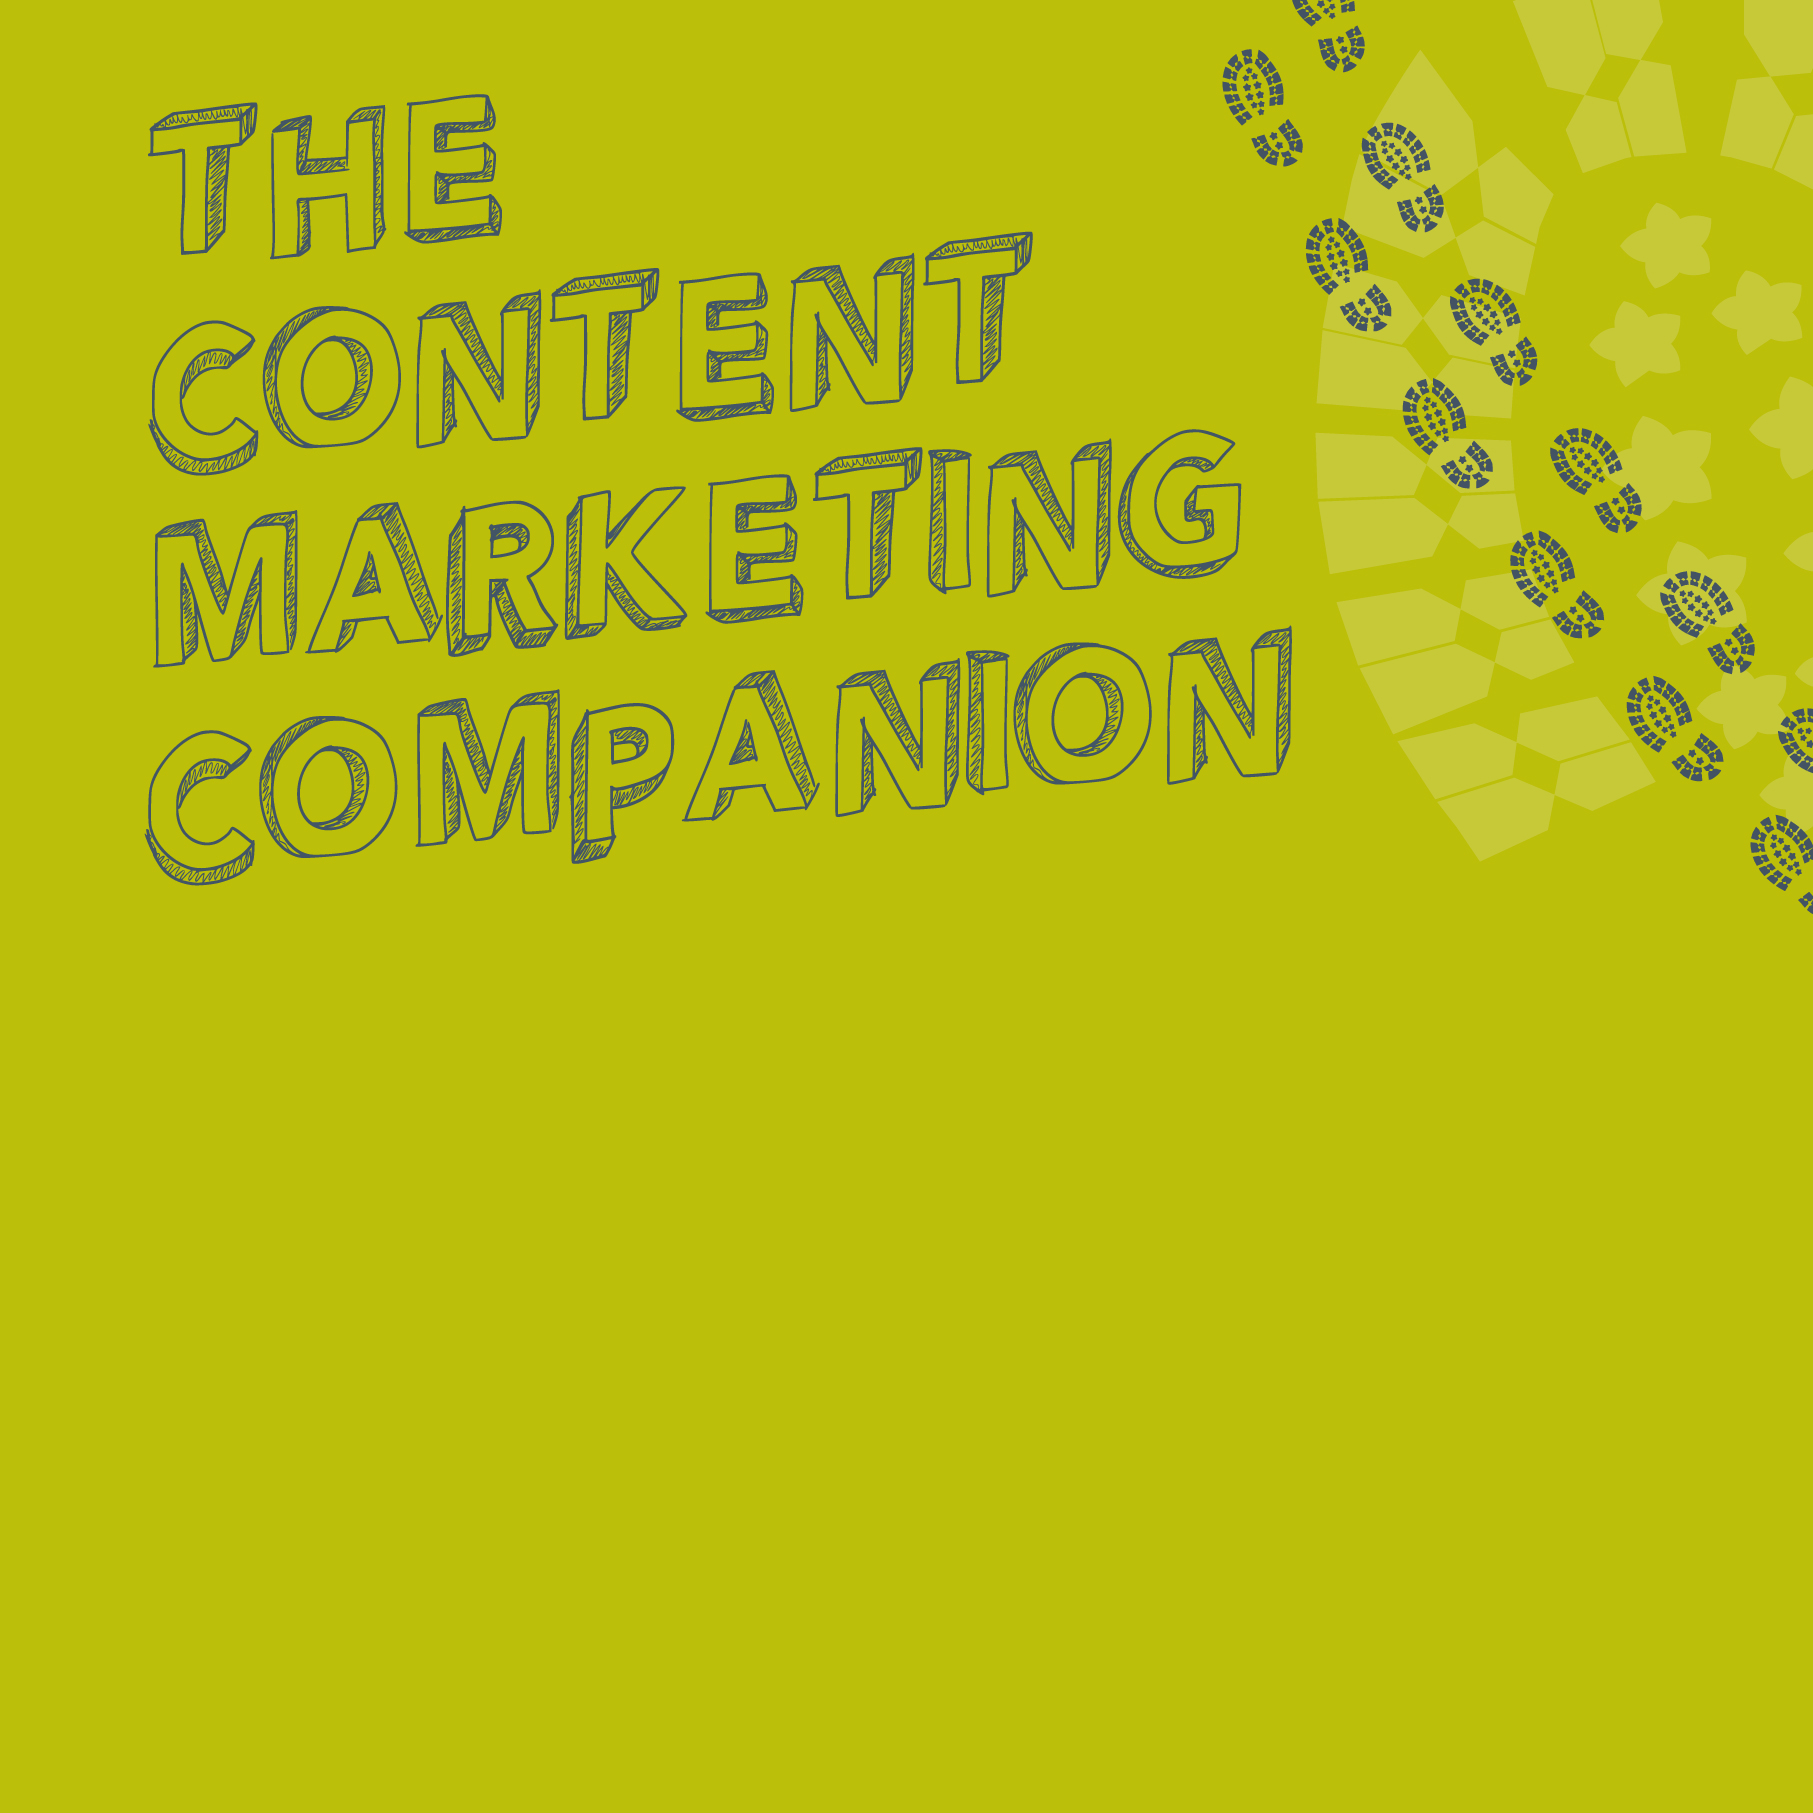 content marketing companies guide image